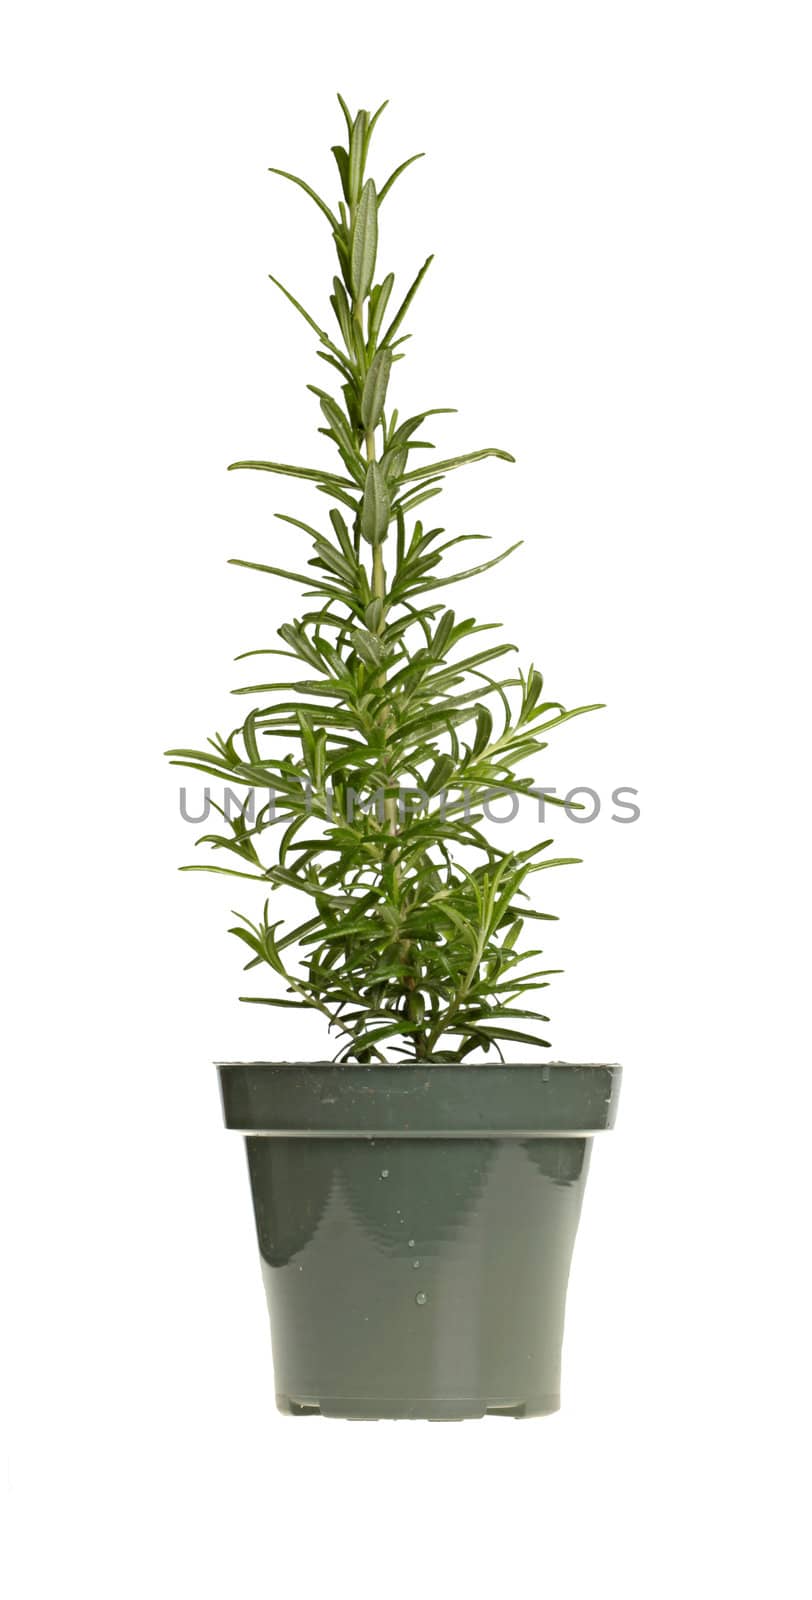 Small, upright plant of the herb rosemary (Rosmarinus officinalis) in a green plastic pot